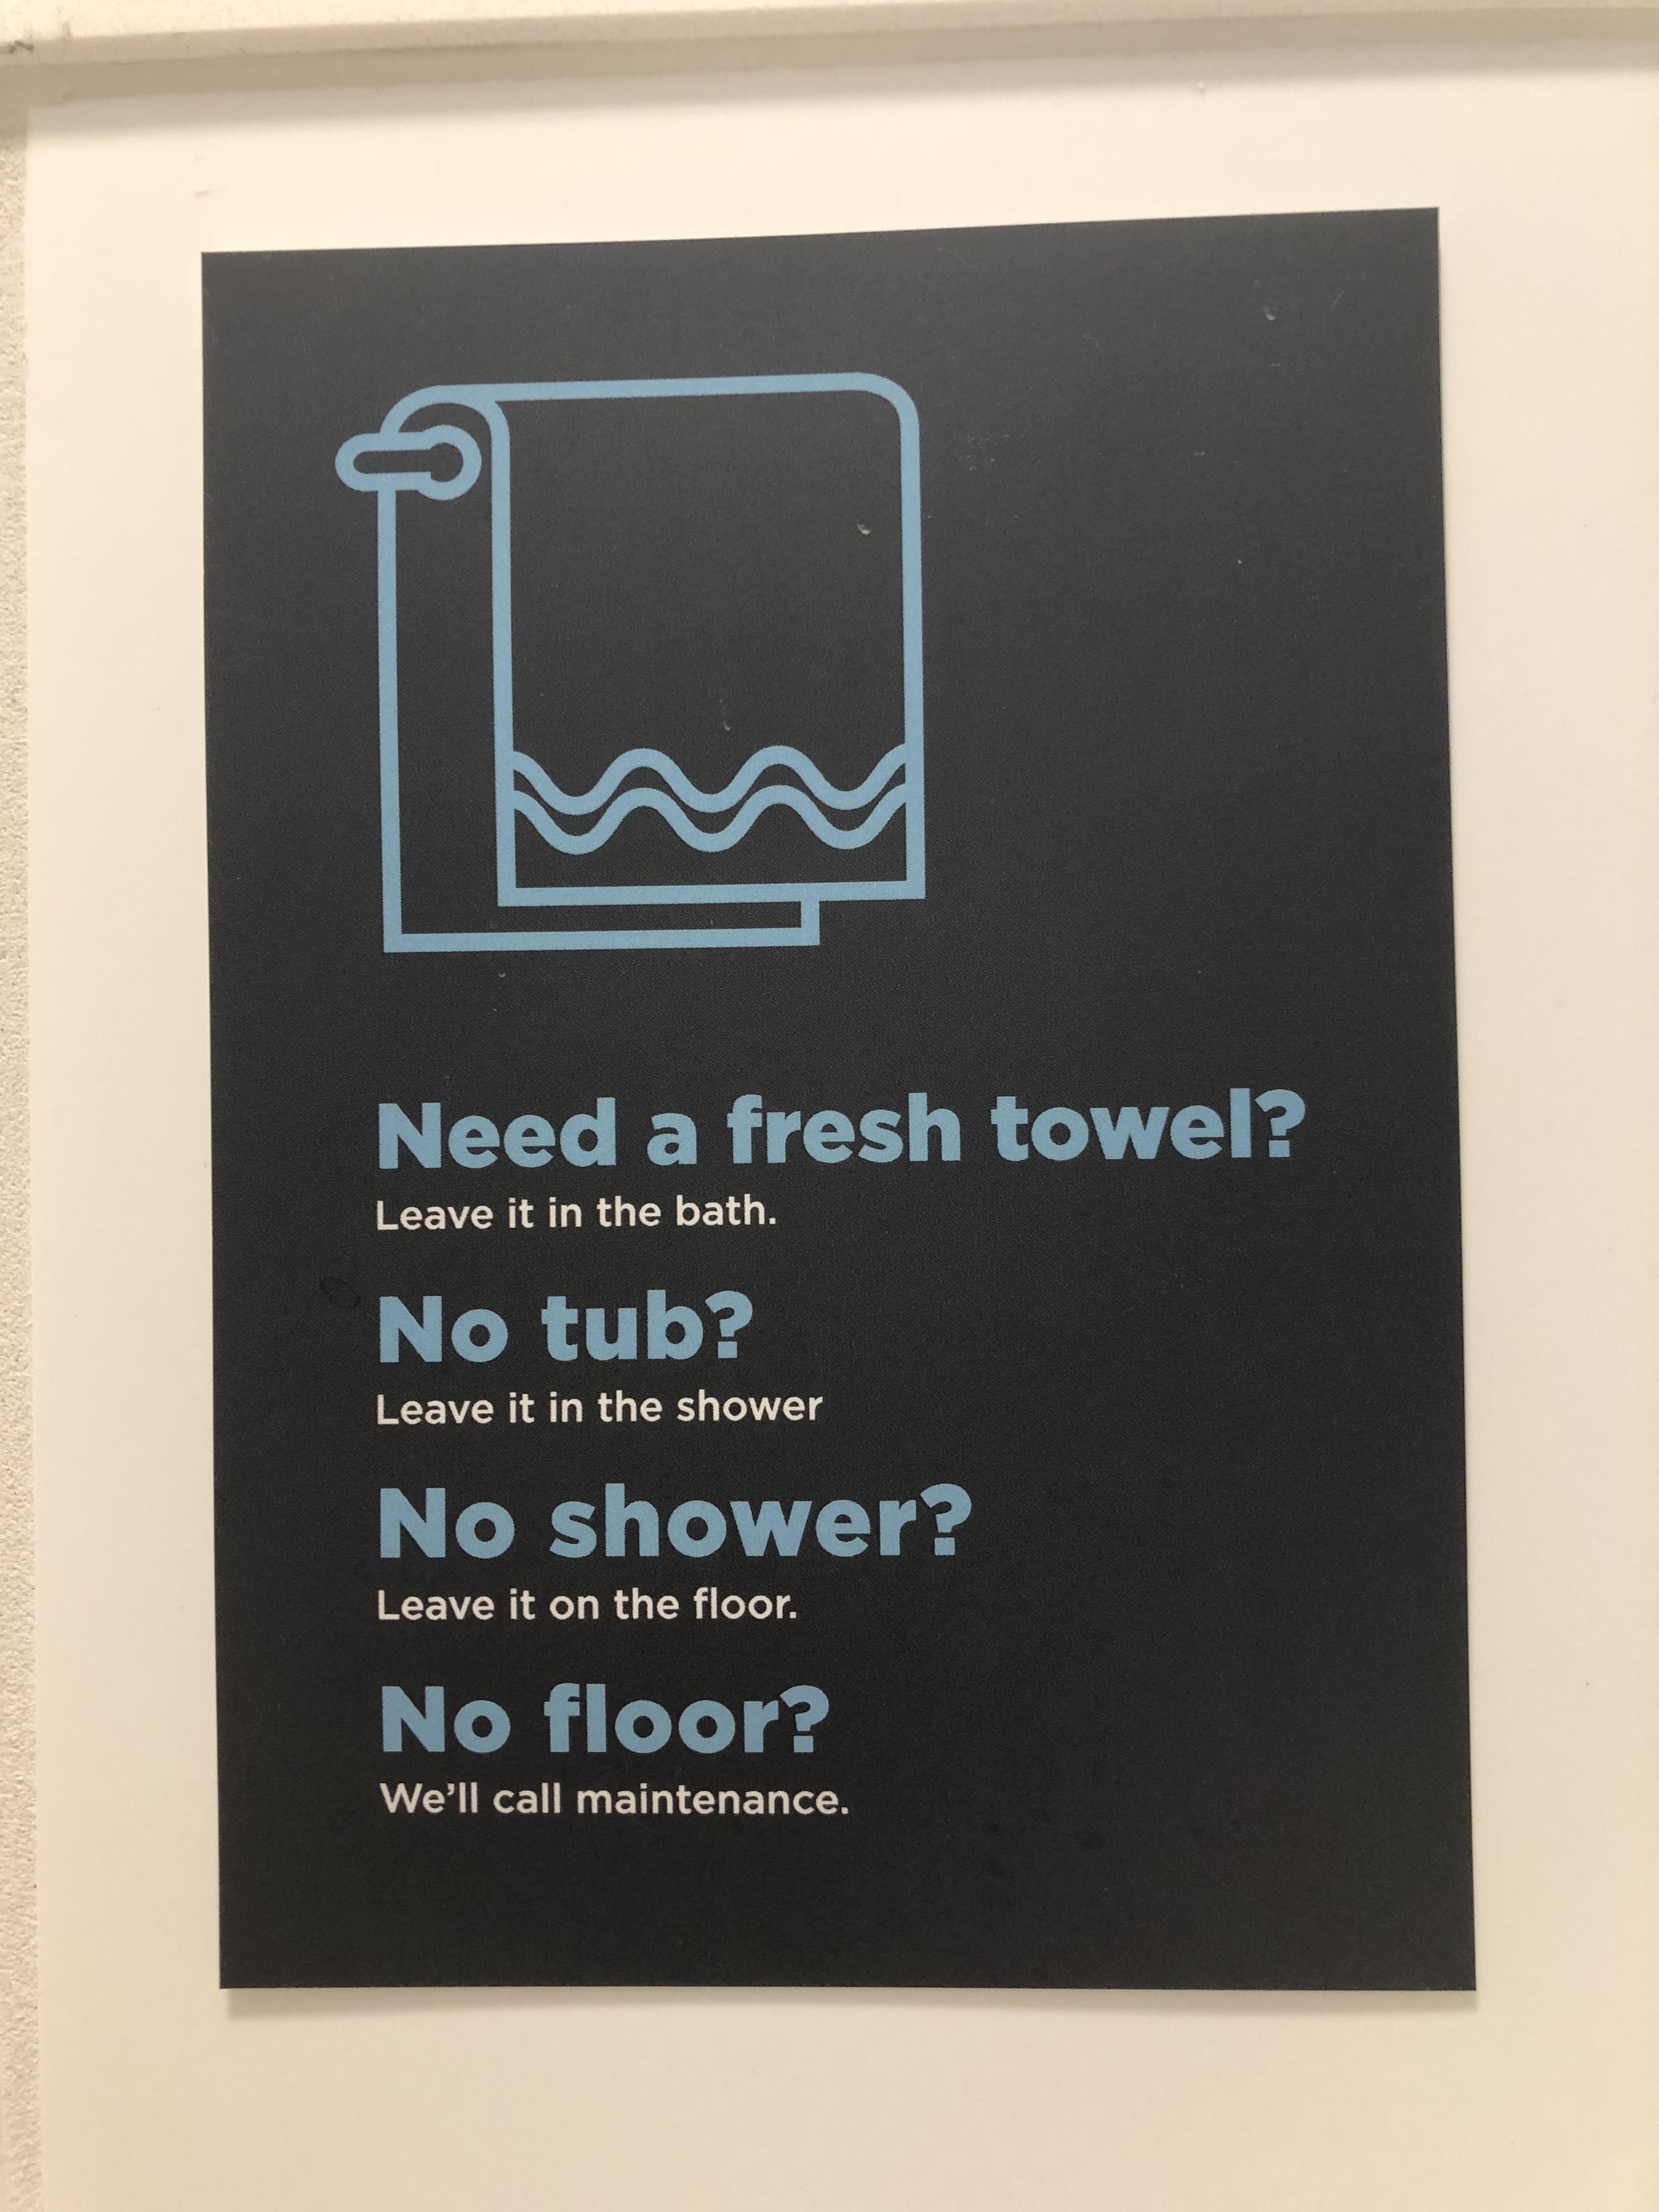 Signage in my hotel bathroom in Melbourne